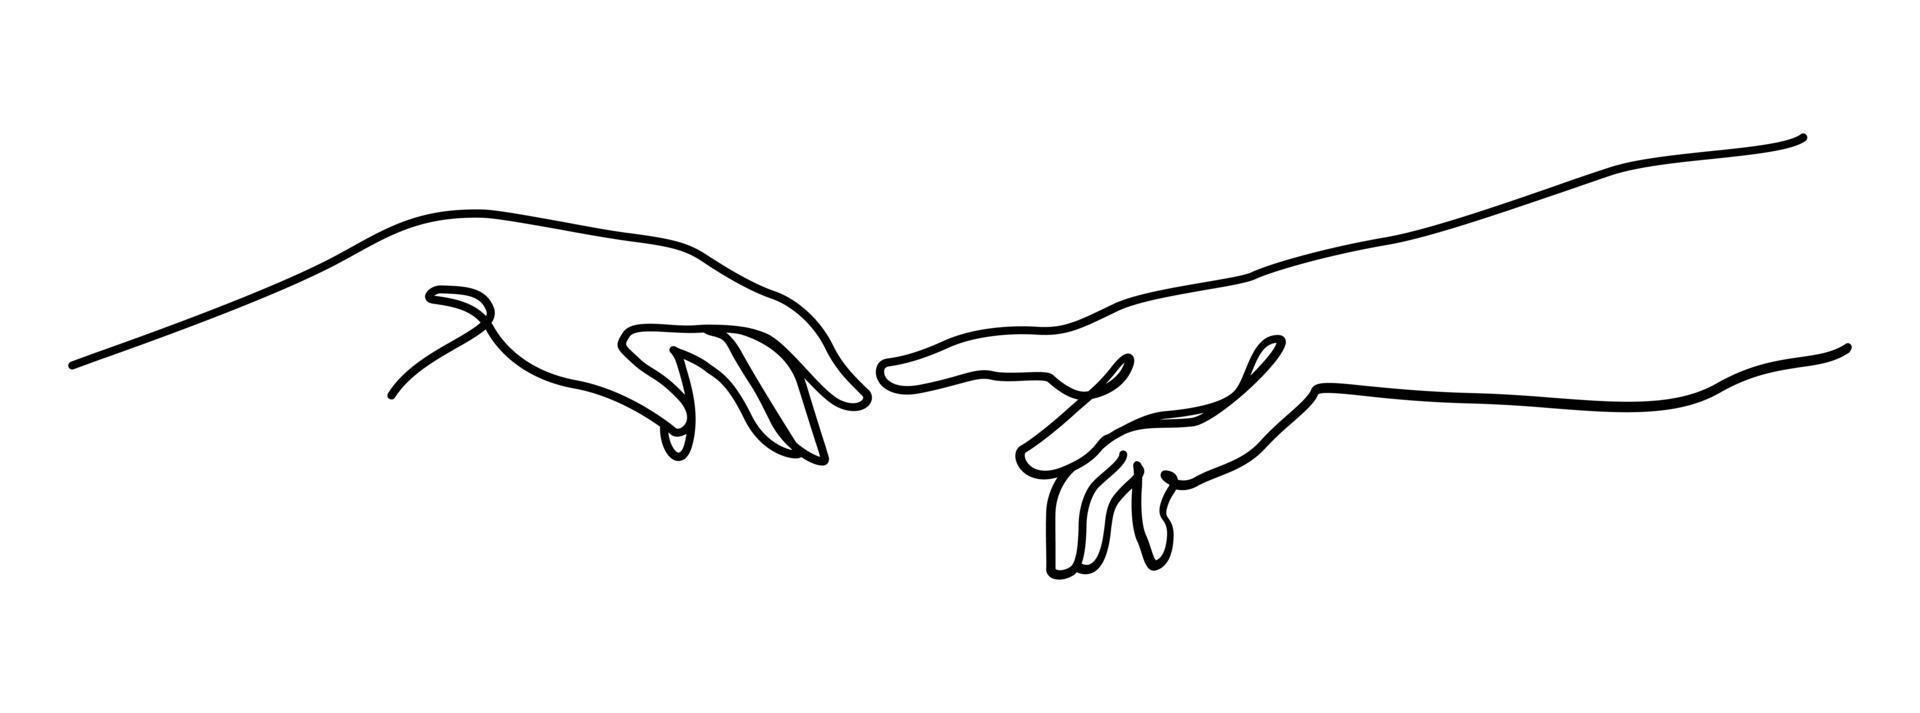 Two hand Adam and god continuous line art vector